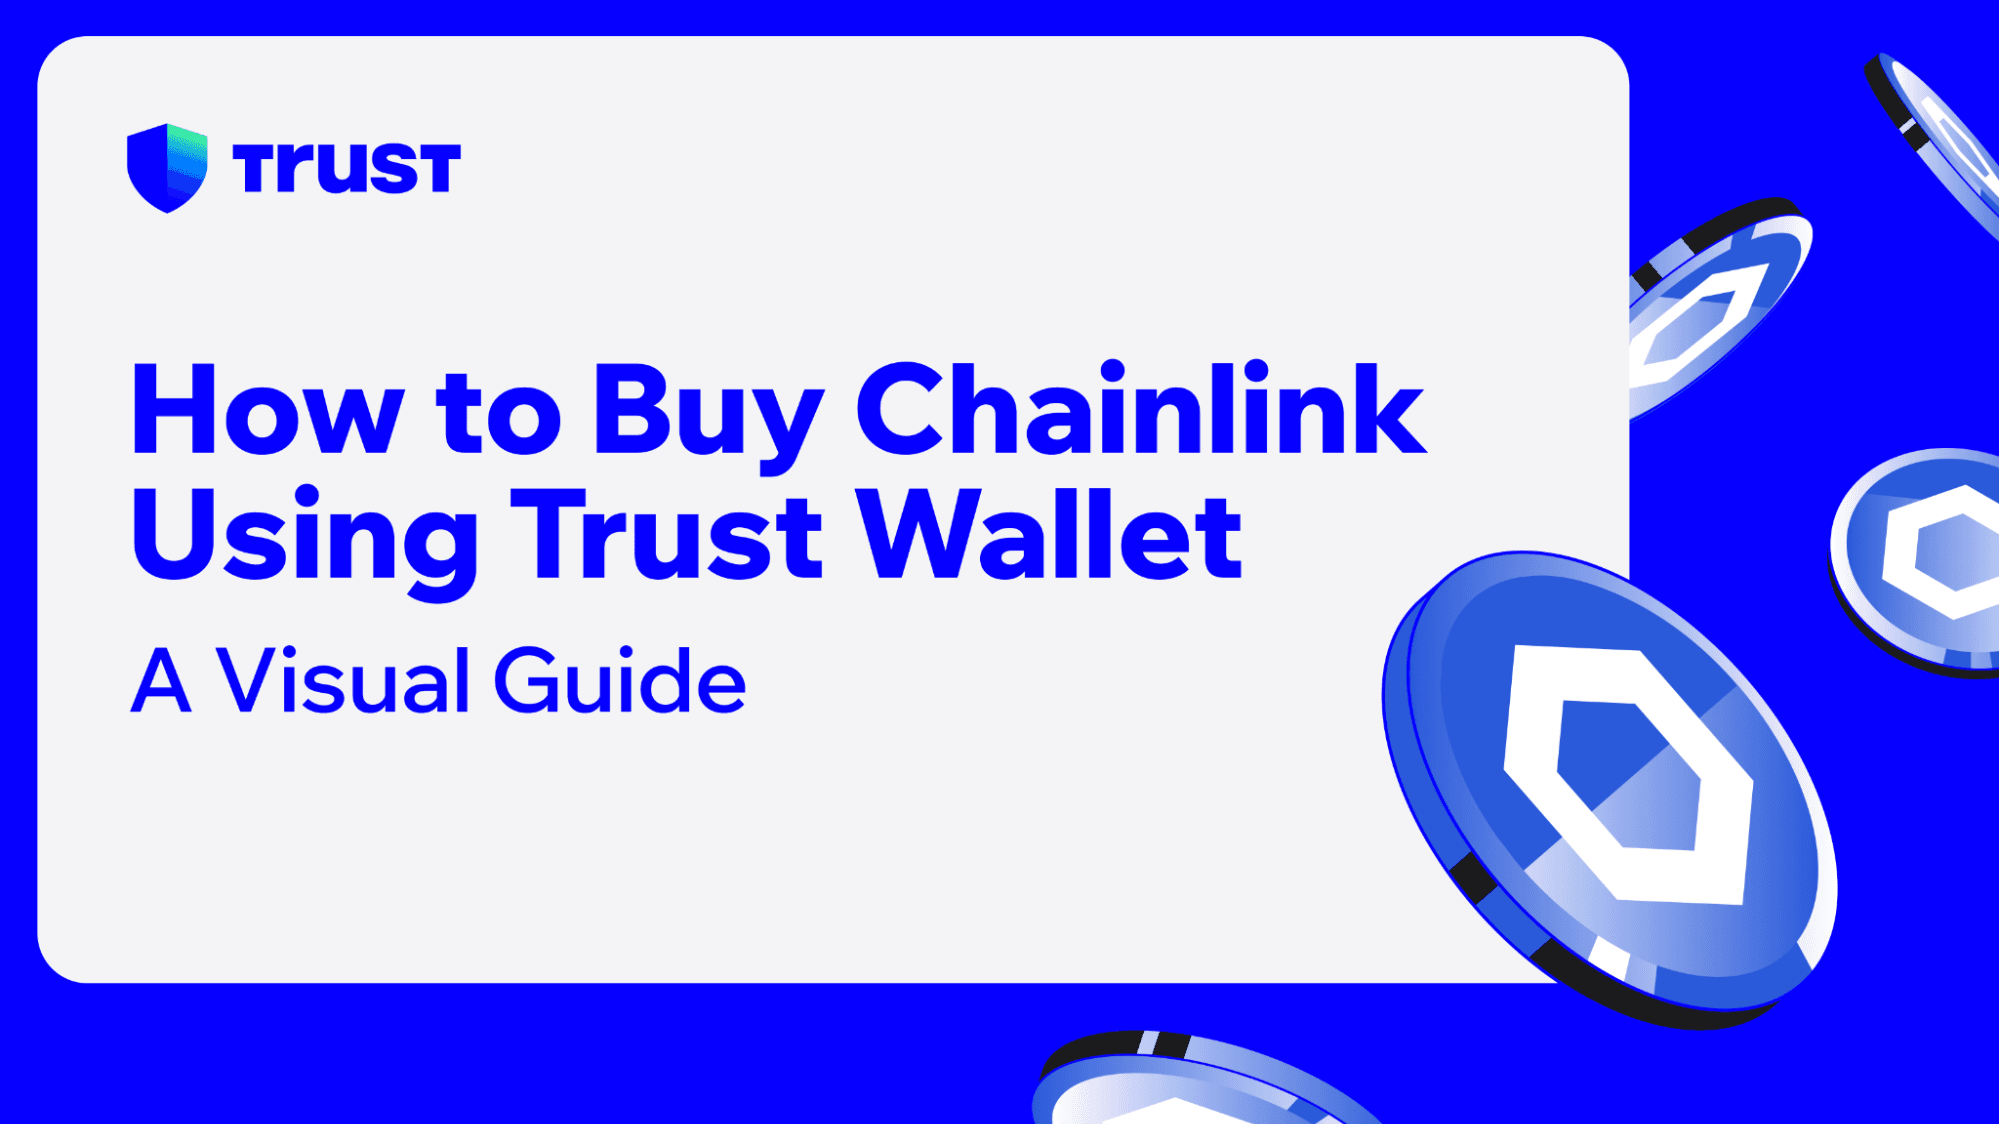 How to Buy Chainlink Using Trust Wallet: A Visual Guide